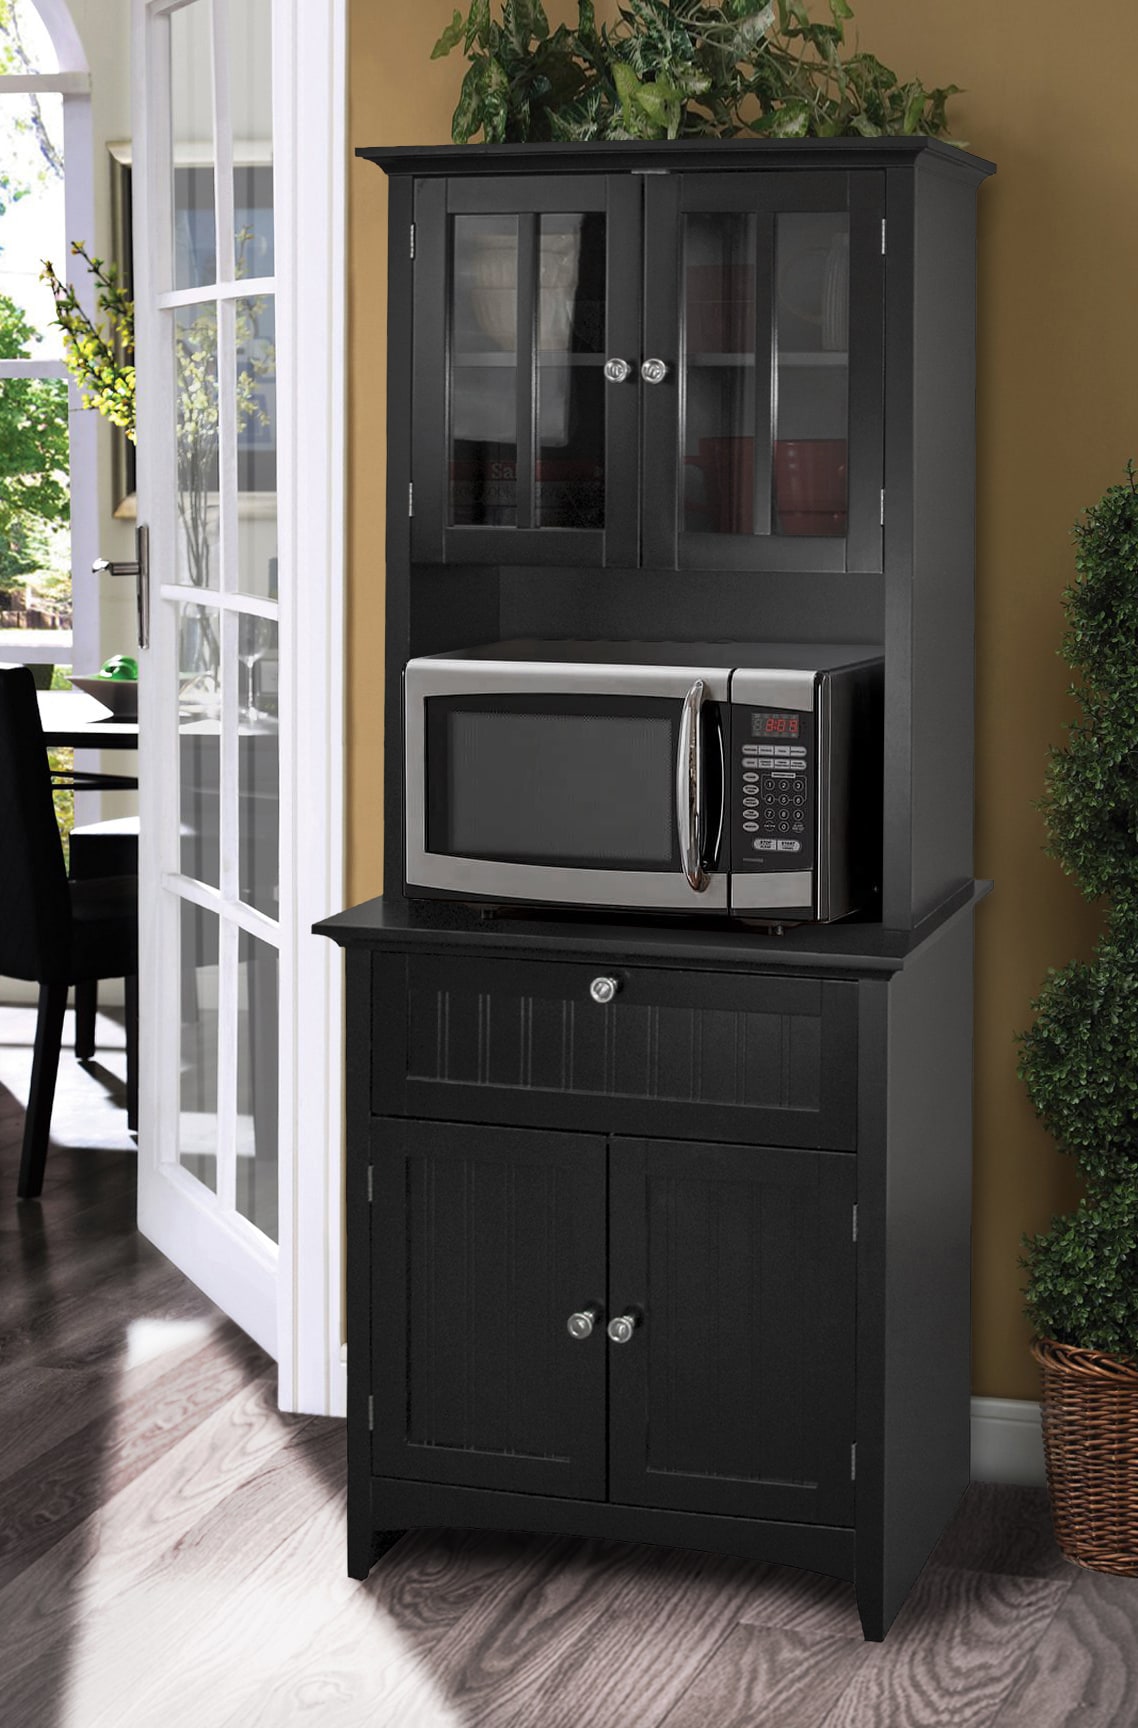 Microwave/Coffee Maker Utility Cabinet in Black